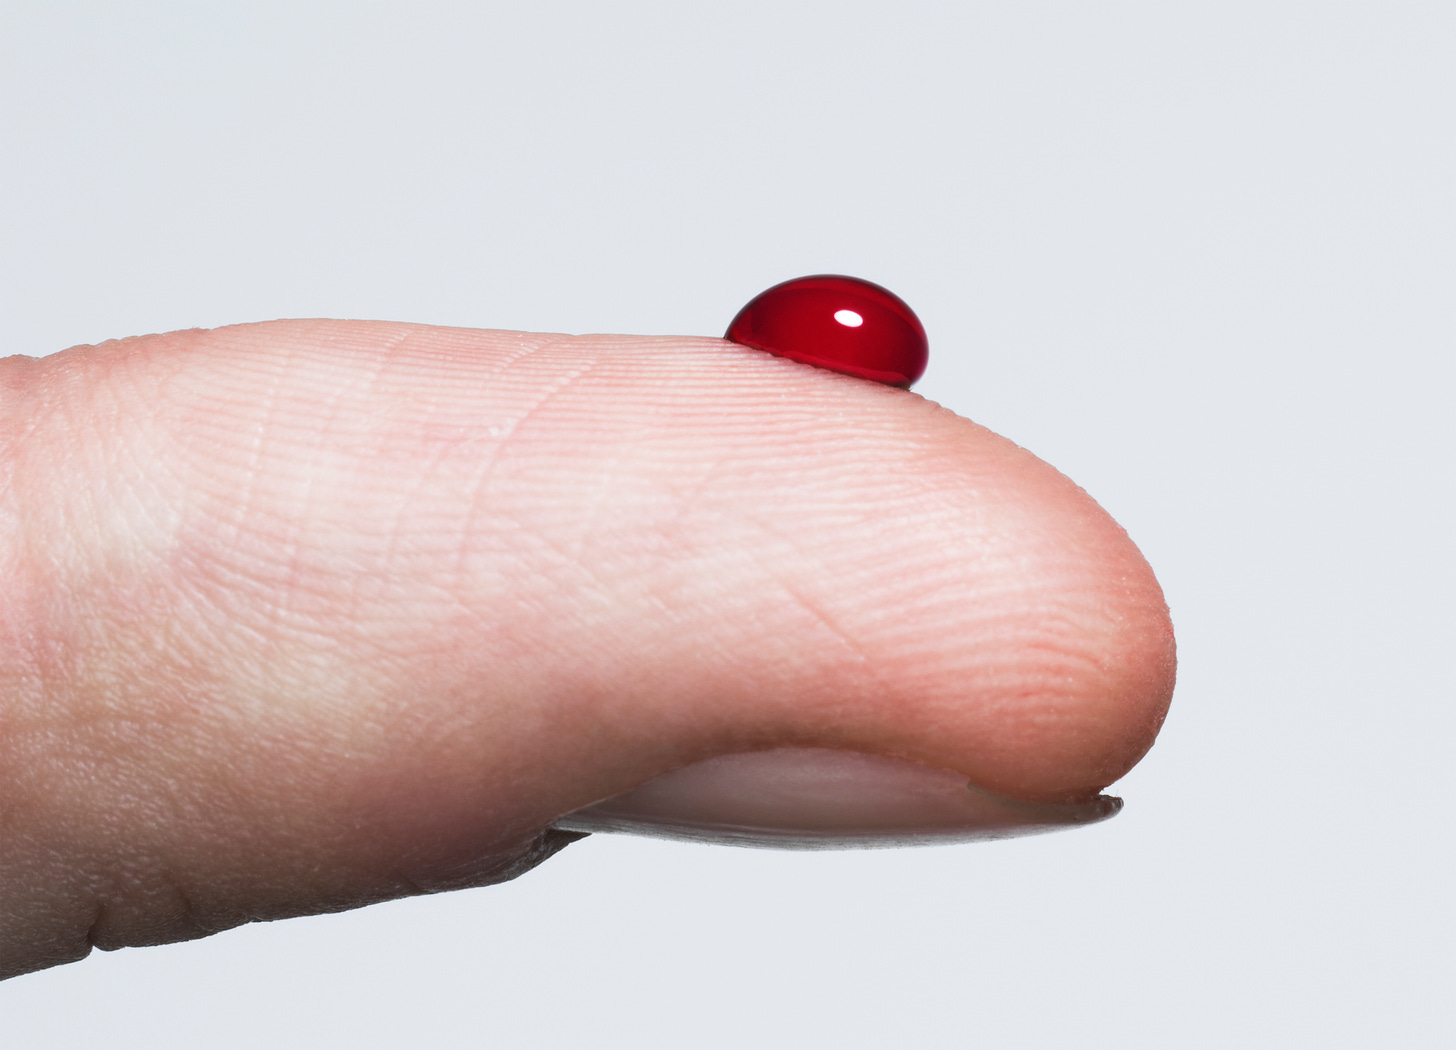 A right index finger close enough that the fingerprints are visible with one single drop of blood the size of a ladybug on it